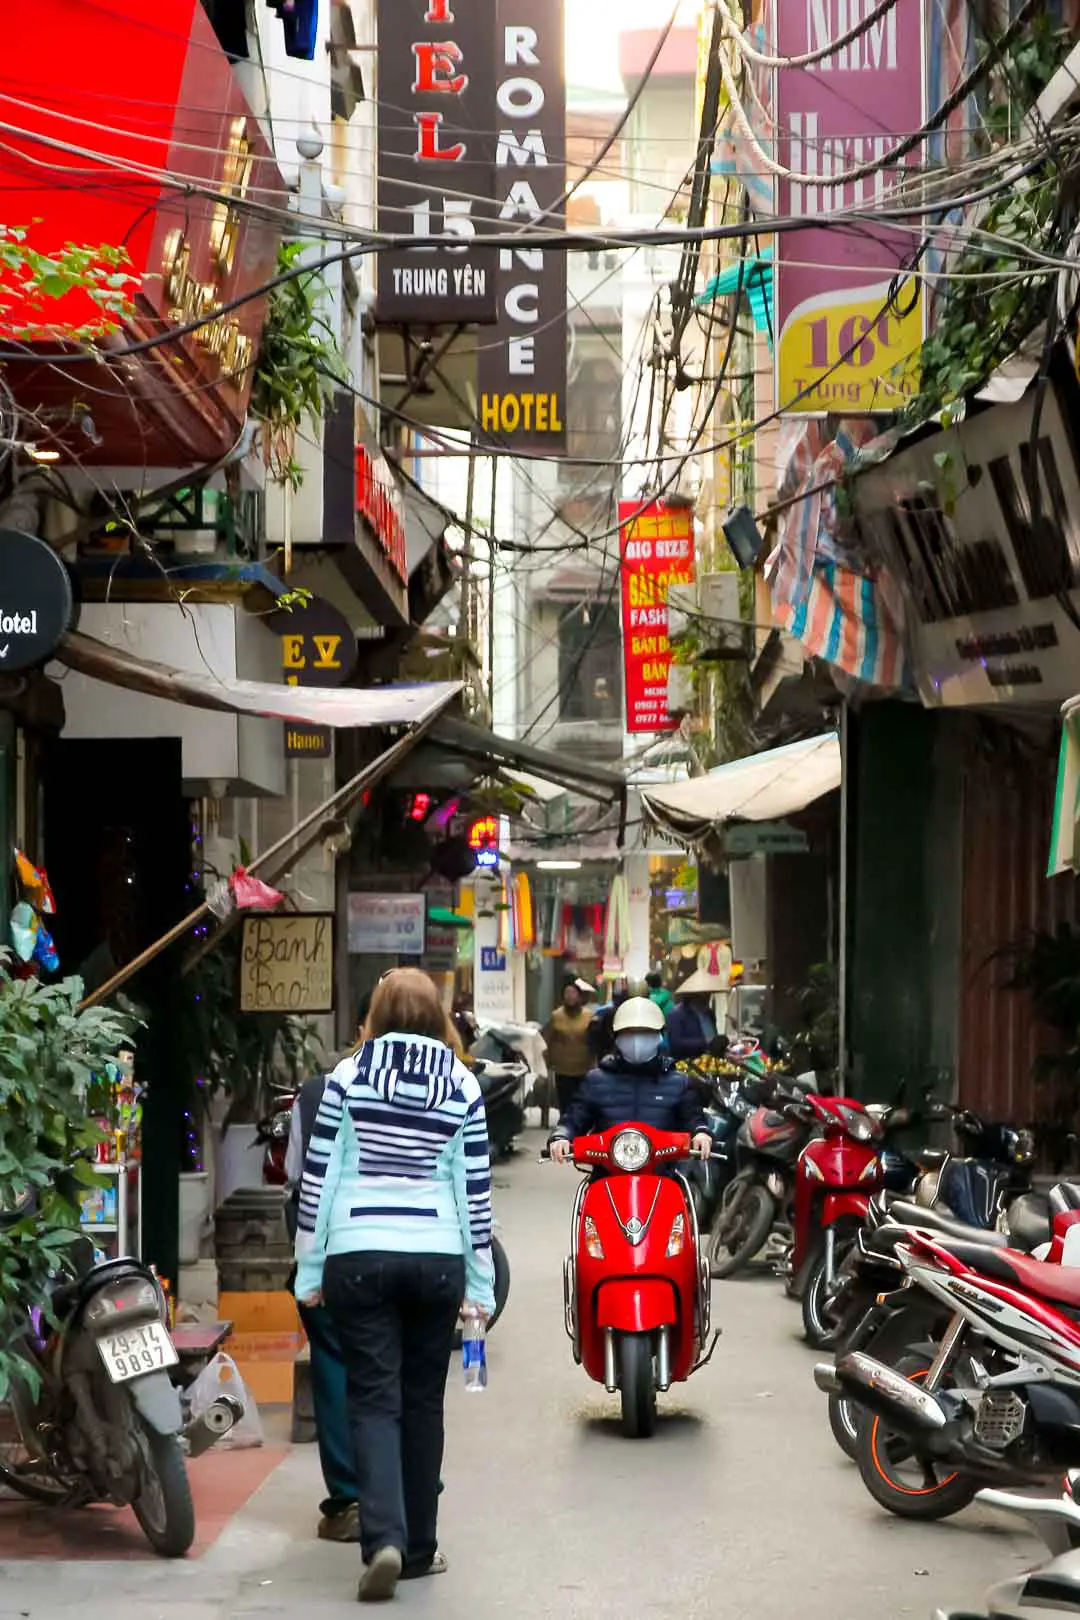 Narrow laneway with restaurant awnings, pedestrians and moped rider